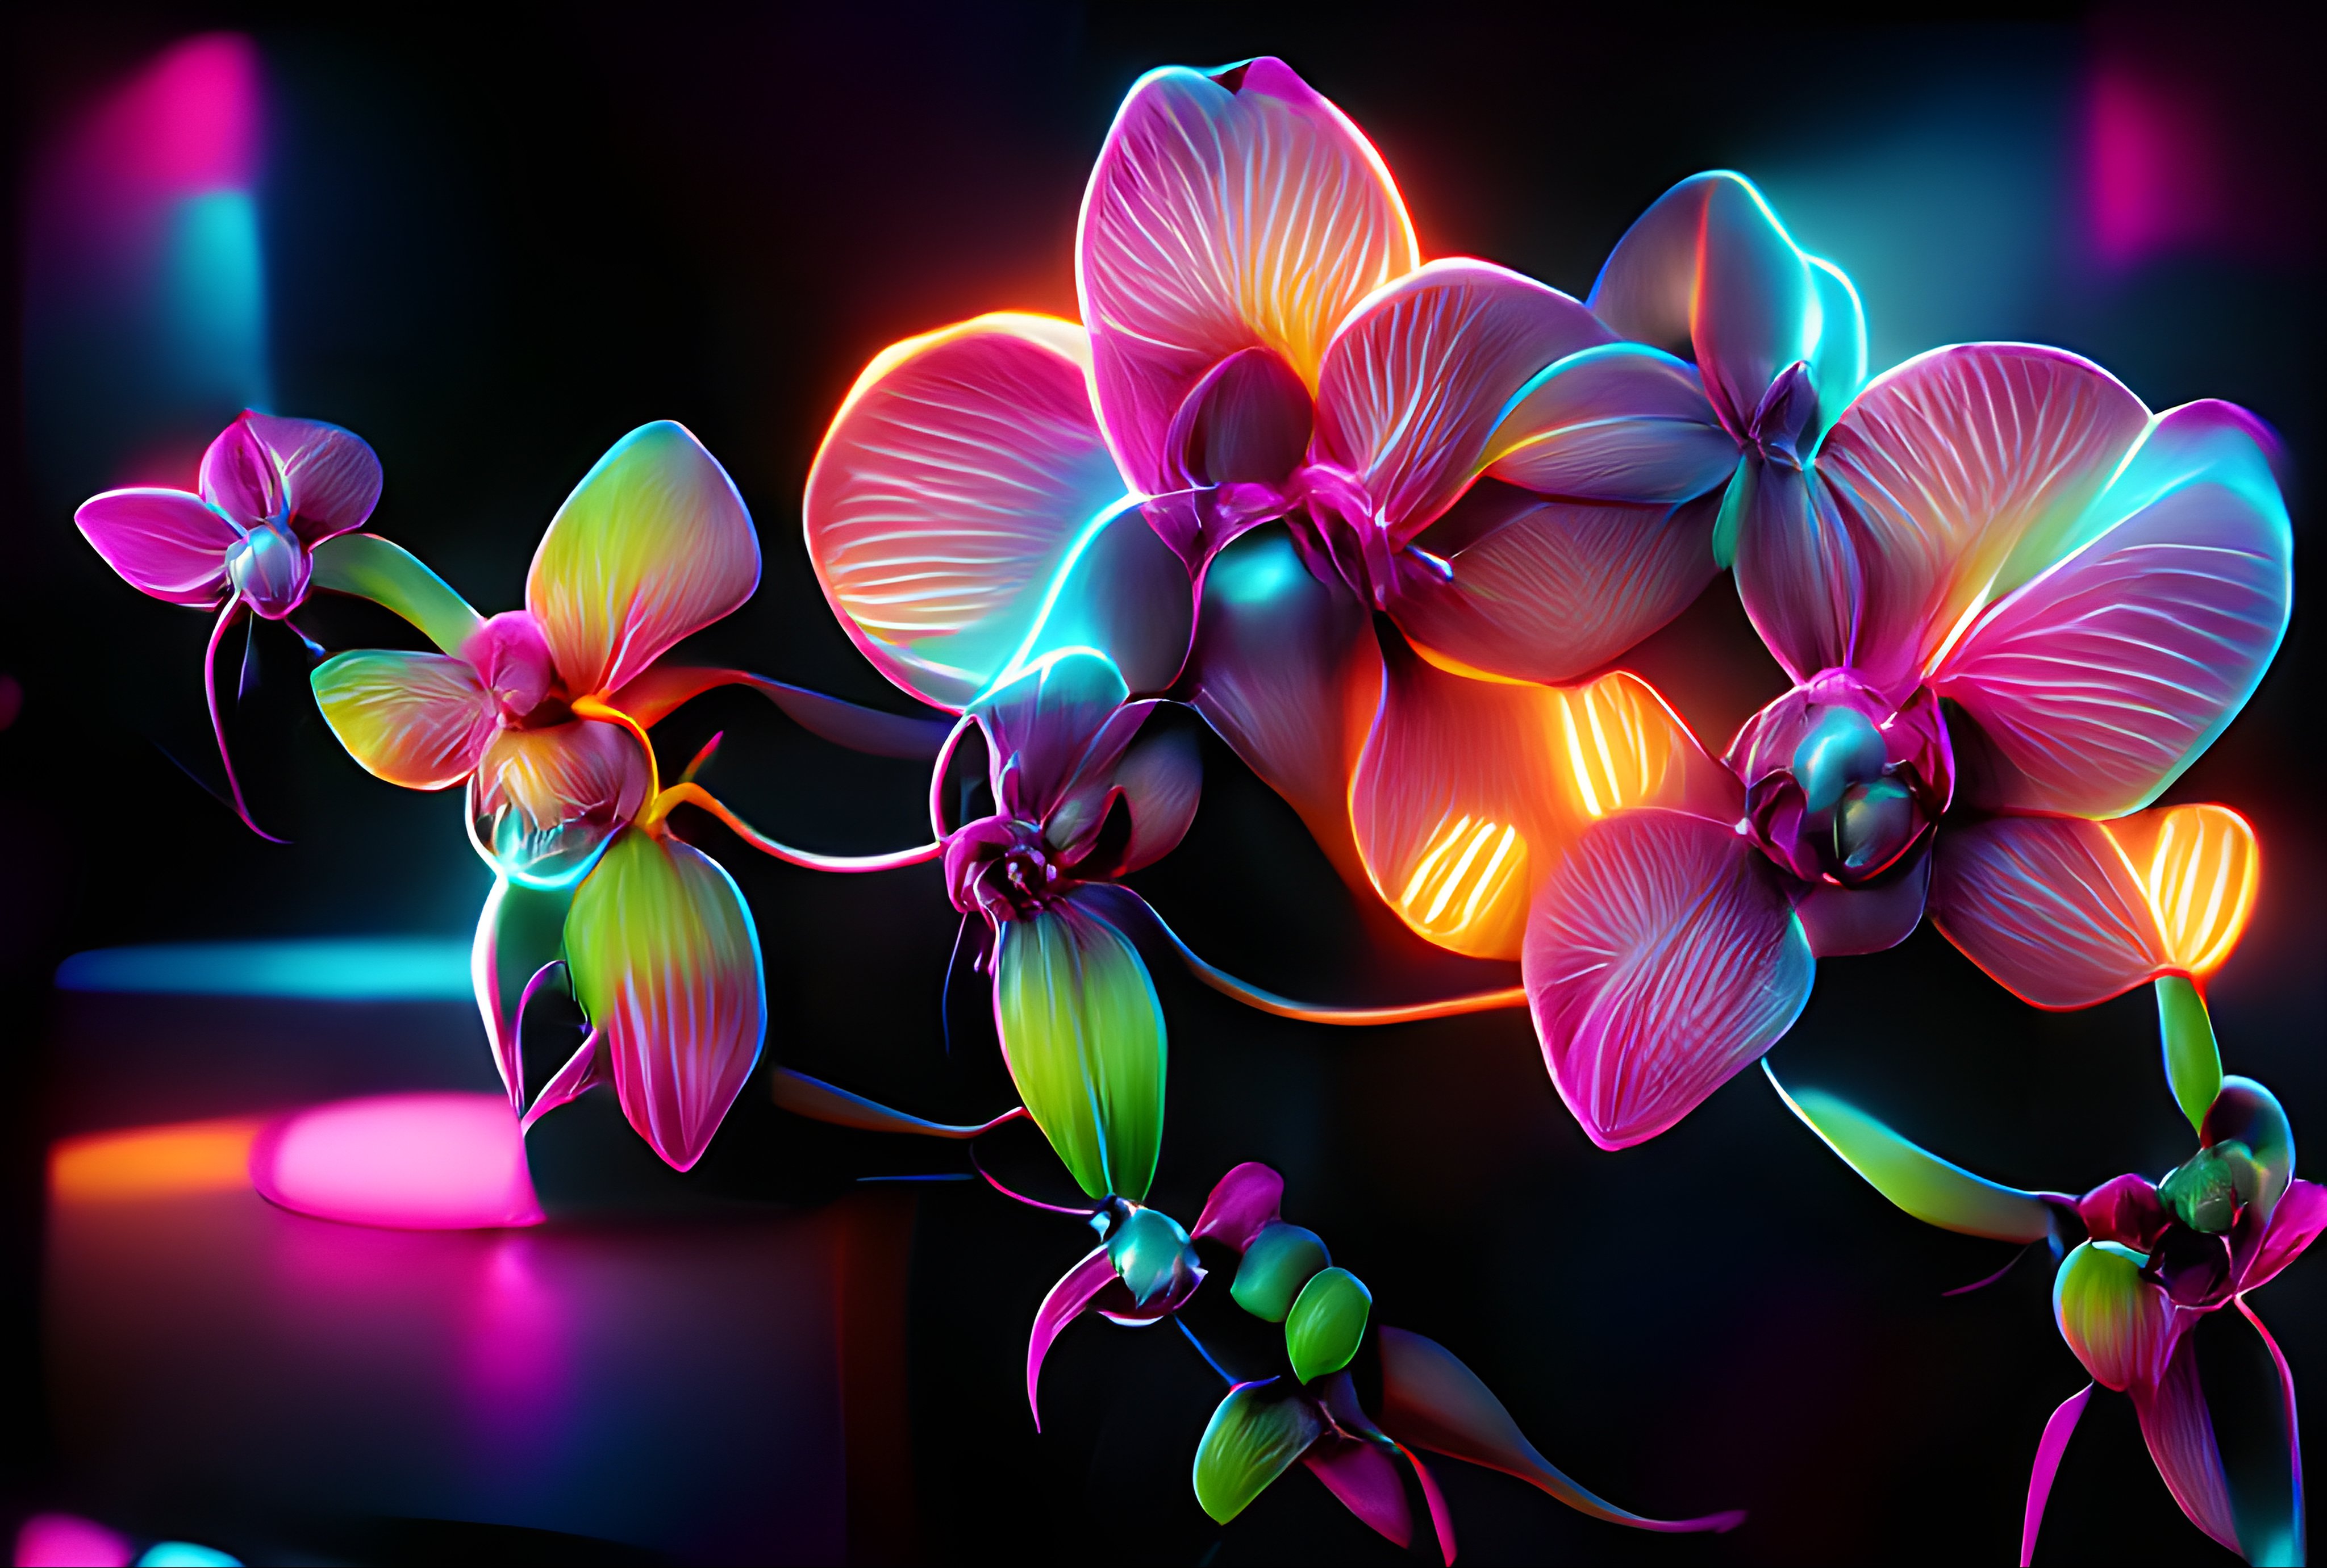 AI ART NFTs on X: Neon orchids. #aigenerated #nft #nftart #nftartwork  #nftgallery #nftartist #nftcollection #nftcollector #nftcommunity #ada  #cardano #cardanocommunity #cnft #art #artwork #modernart #artcollector  #aiart #aiartist #aiartwork